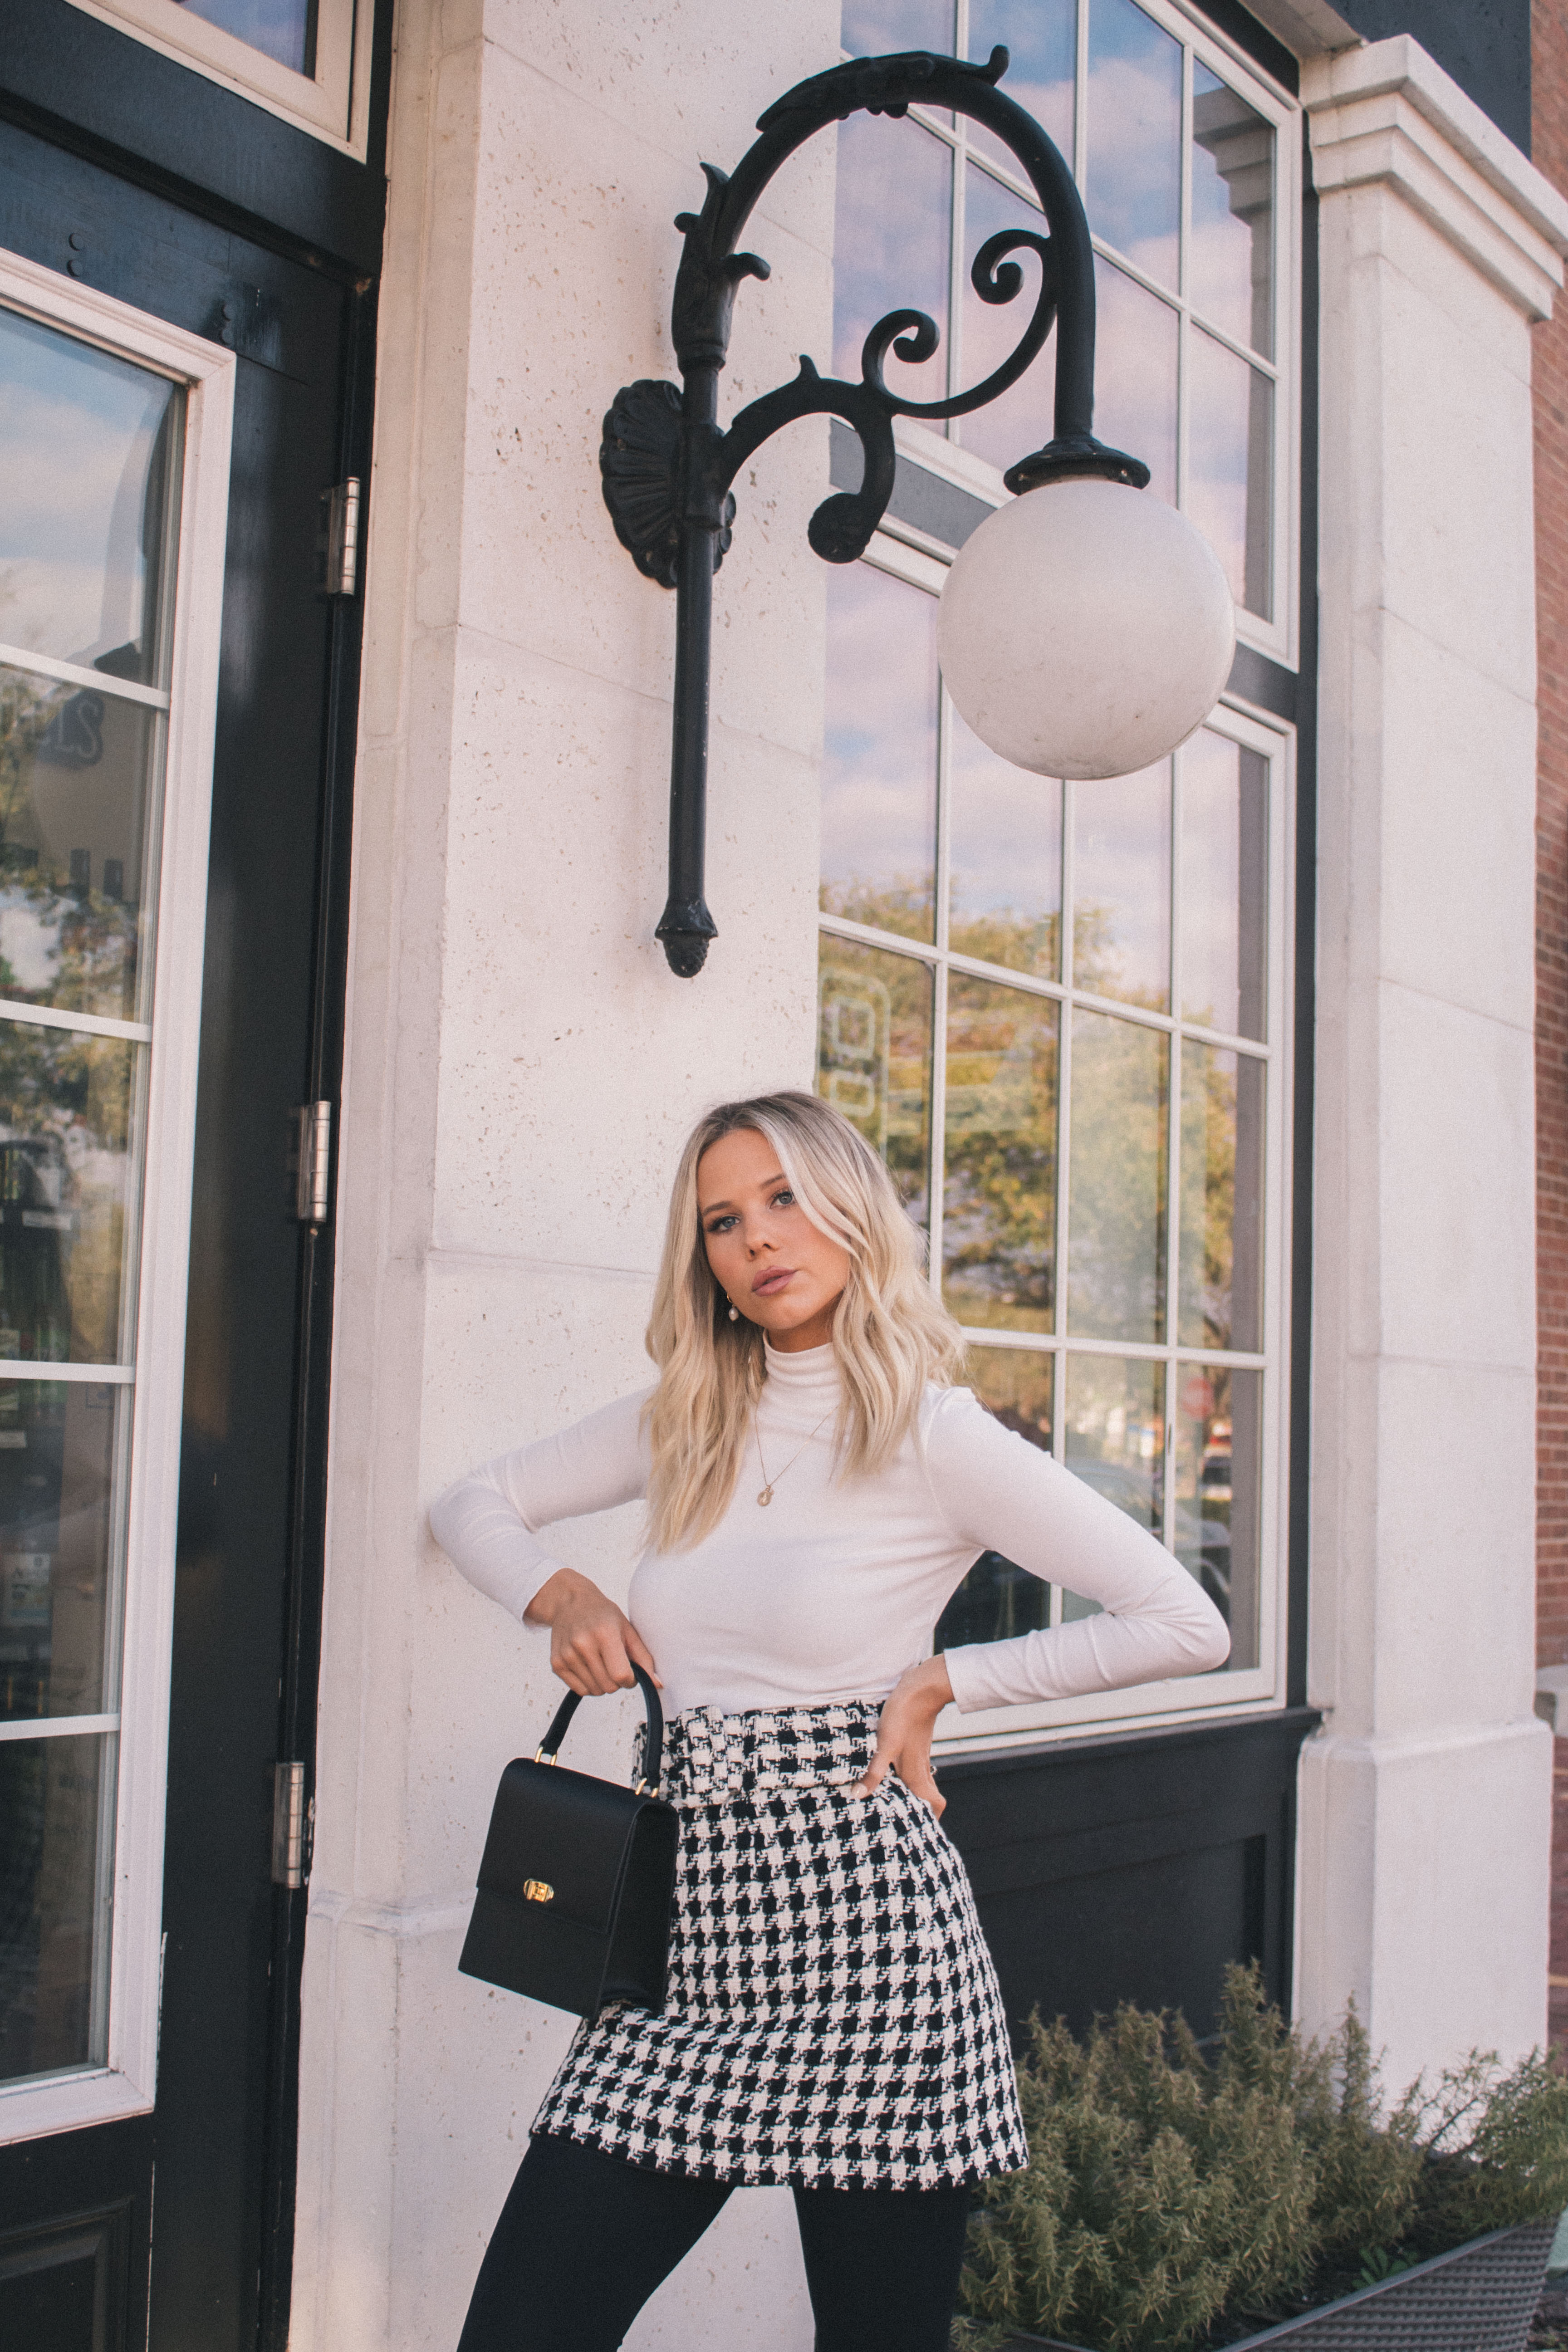 Classic outfit with houndstooth #houndstooth #classicoutfit 